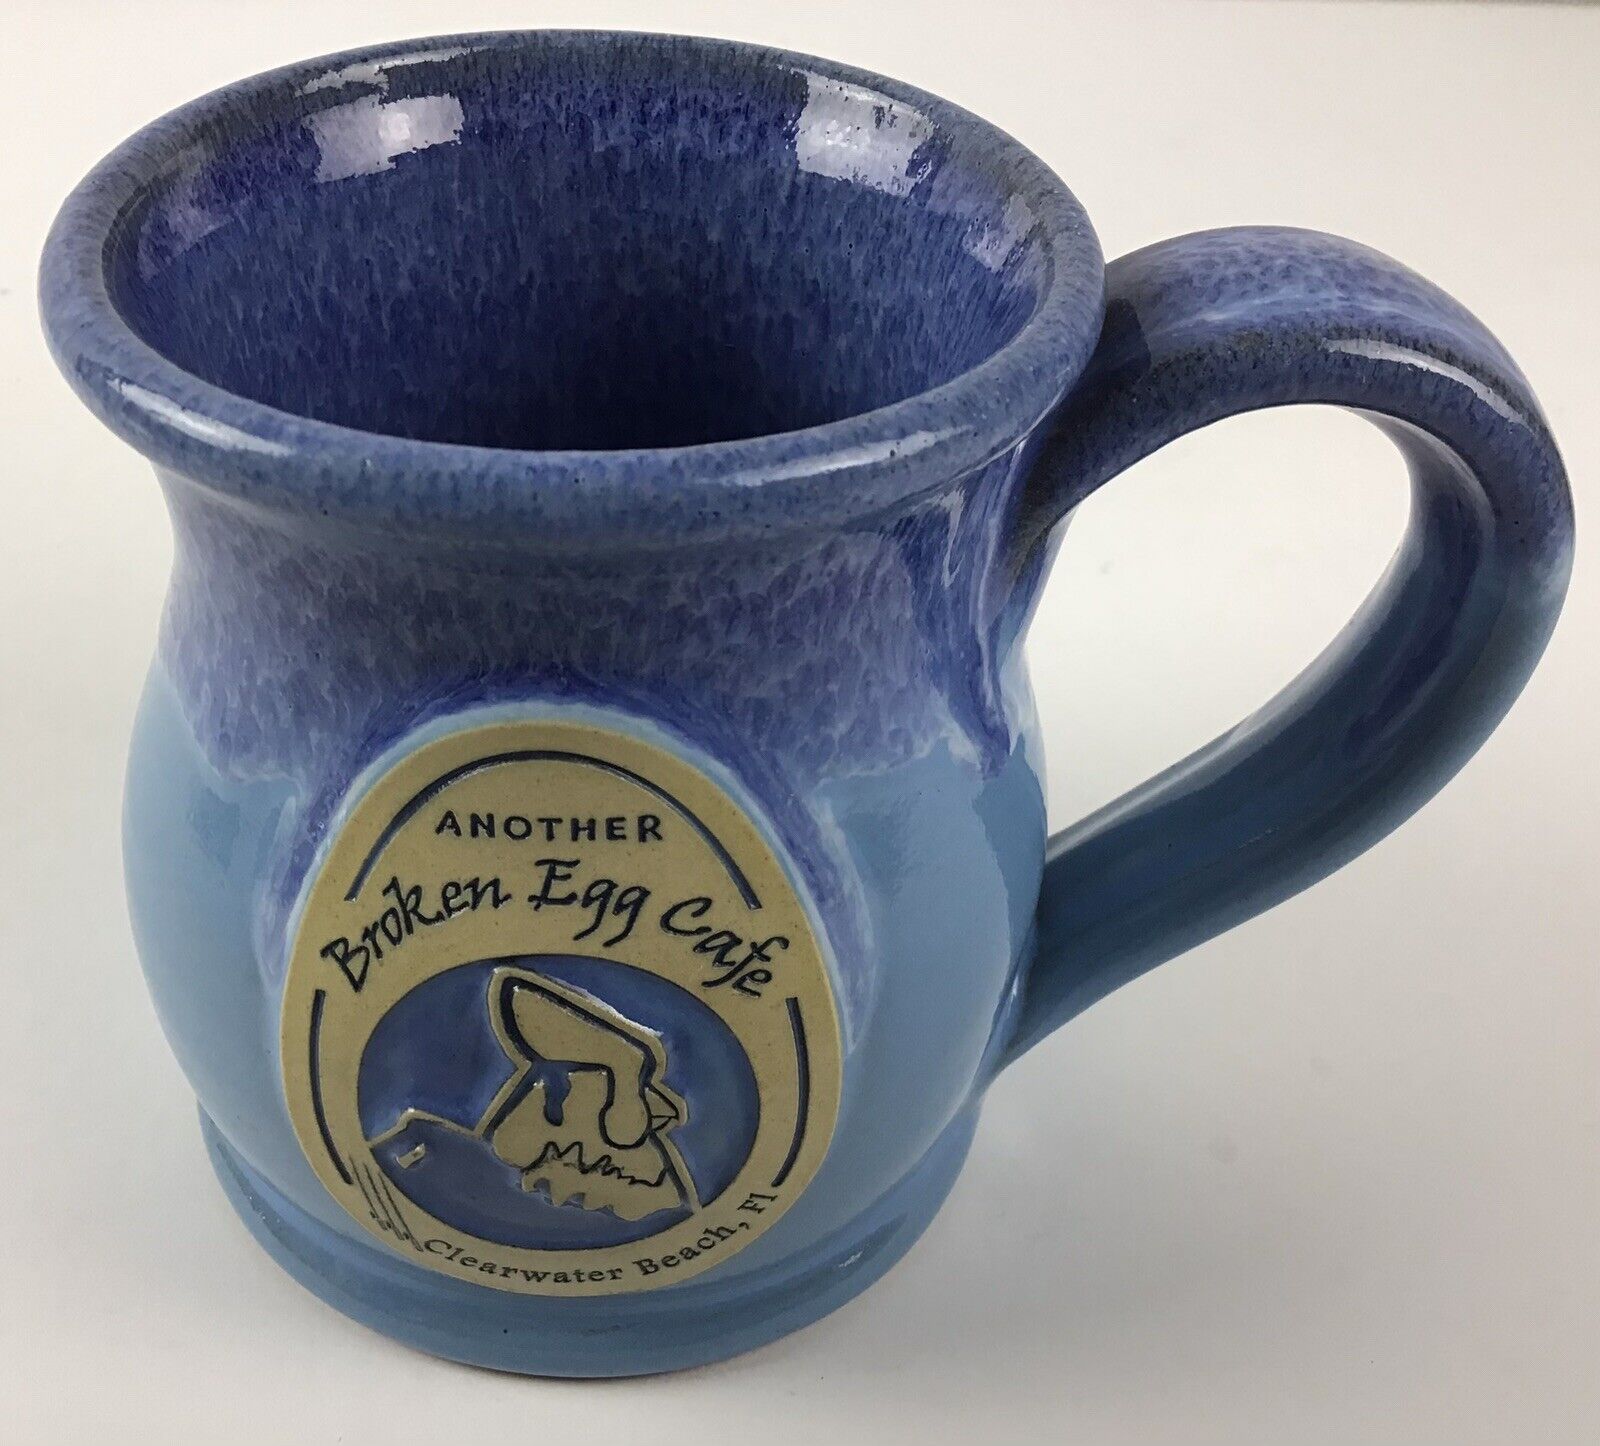 Another Broken Egg Cafe Coffee Mug Cup Clearwater Beach Florida Deneen Pottery 